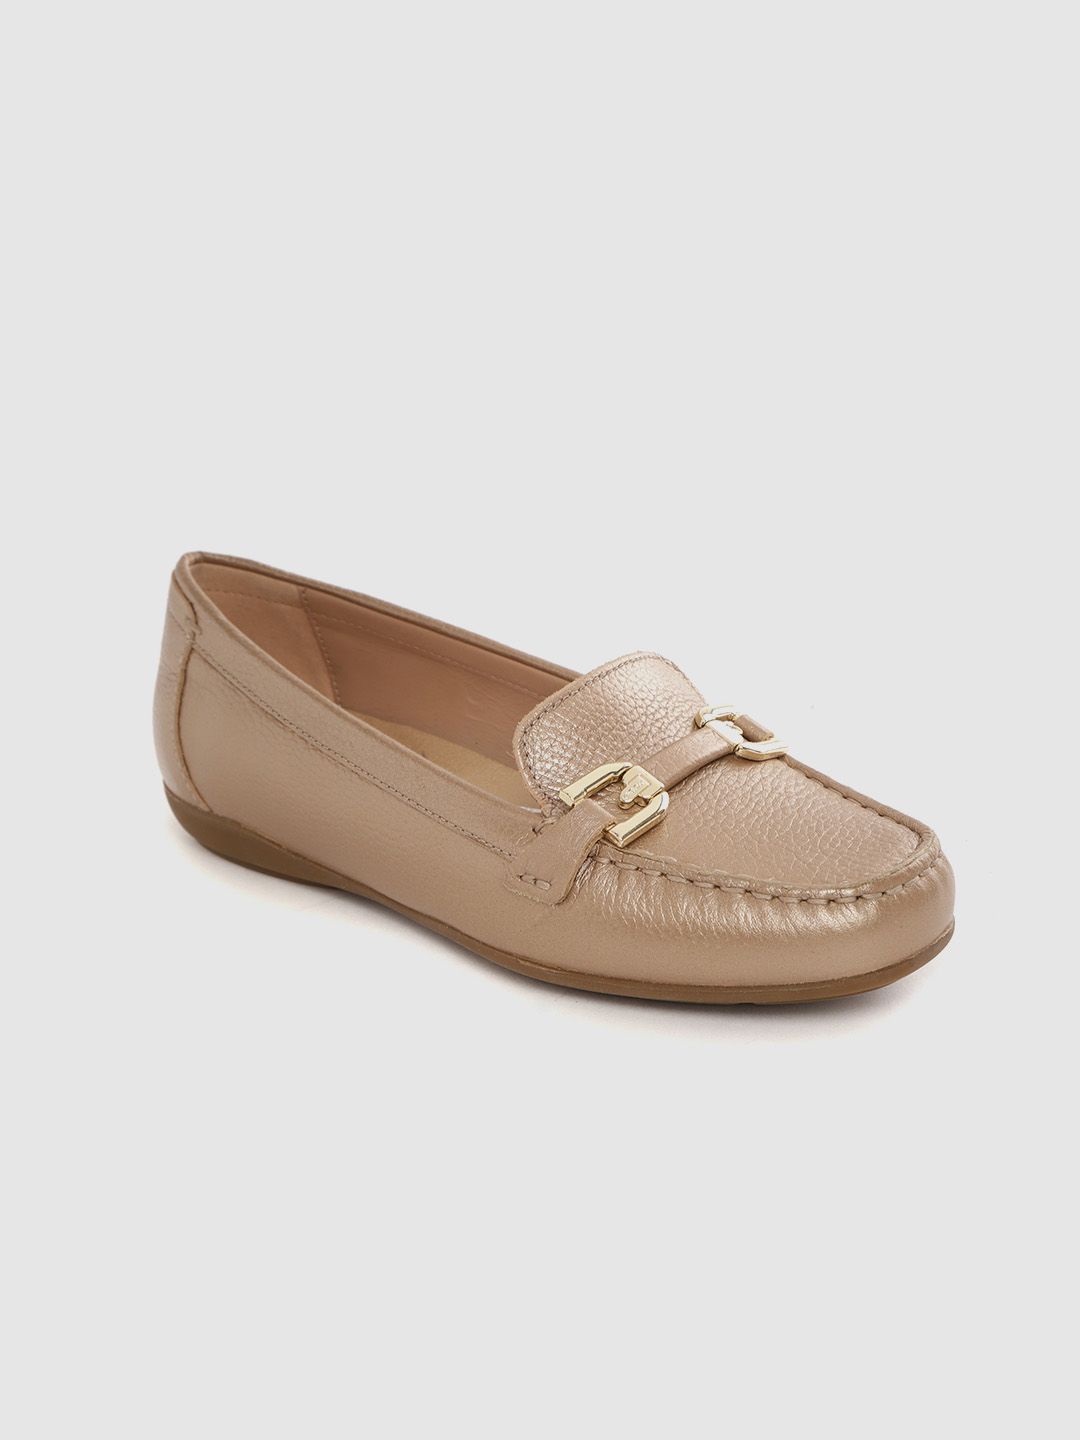 Geox Women Beige Solid Leather Lightweight Loafers Price in India